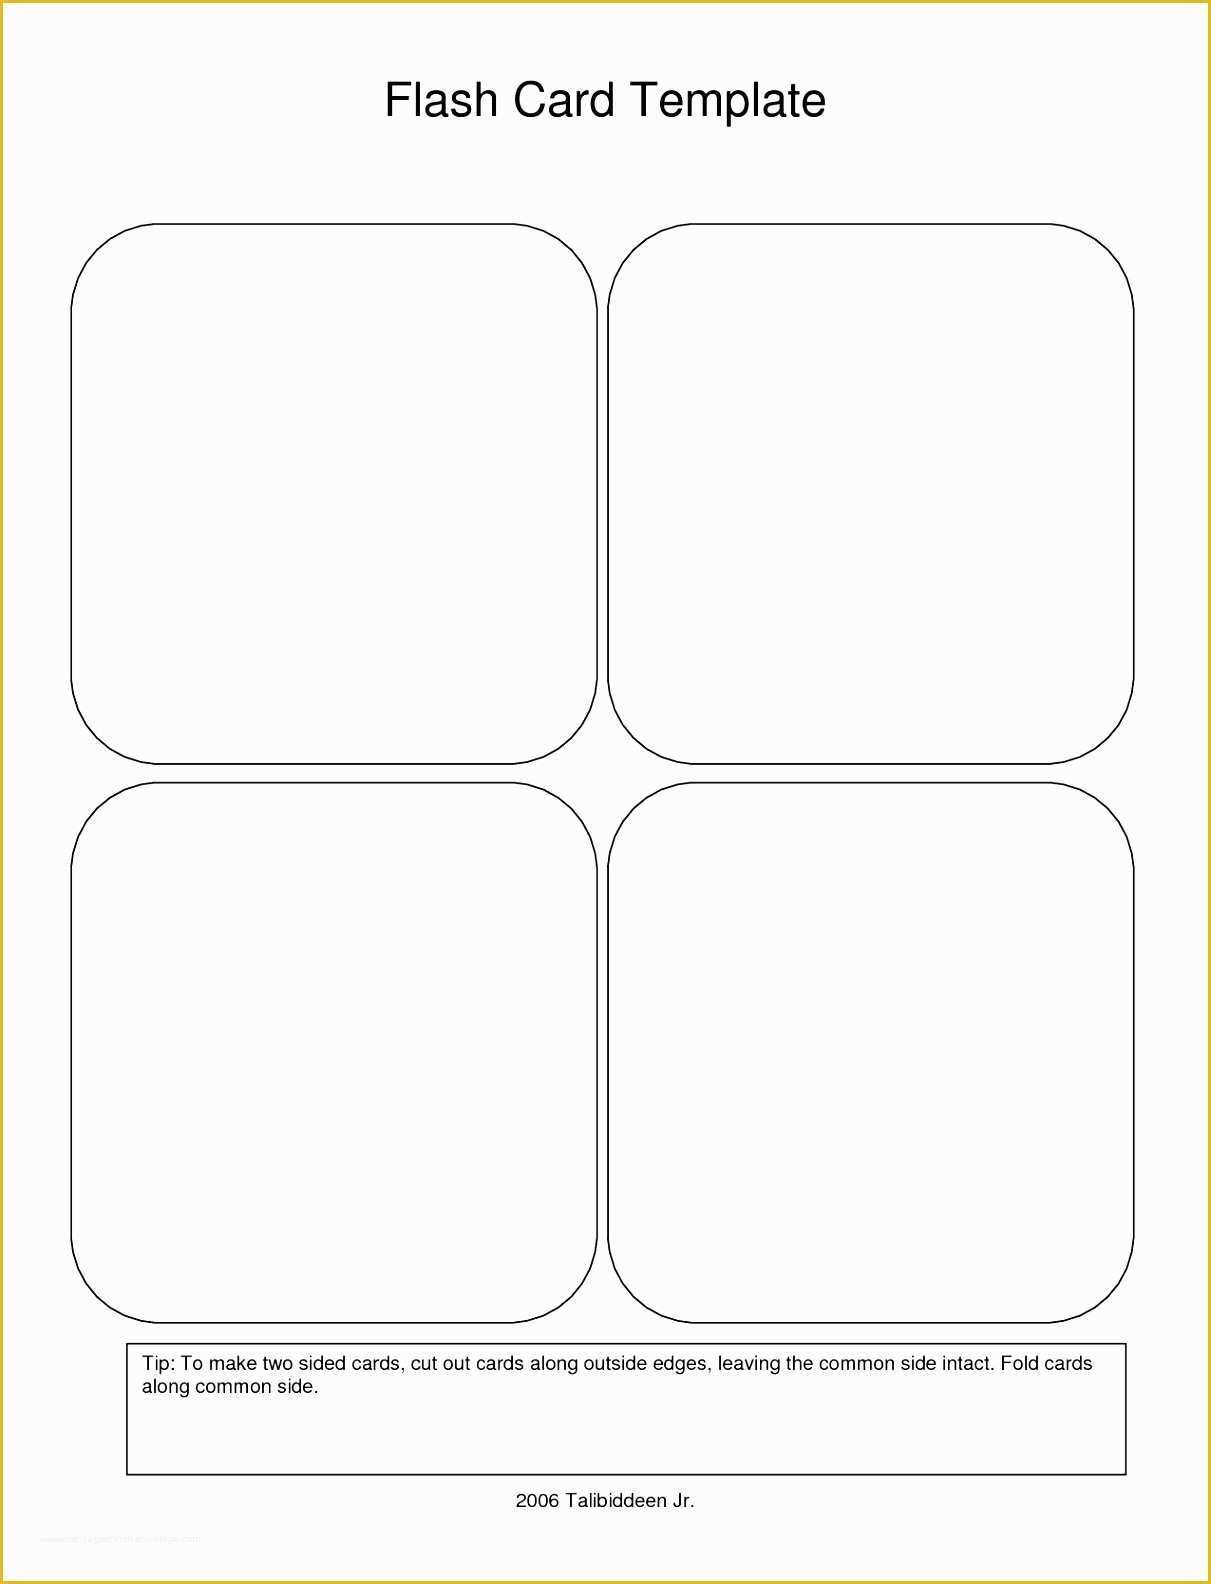 Free Template to Make Flash Cards Of 9 Free Printable Flash Card Template Sampletemplatess